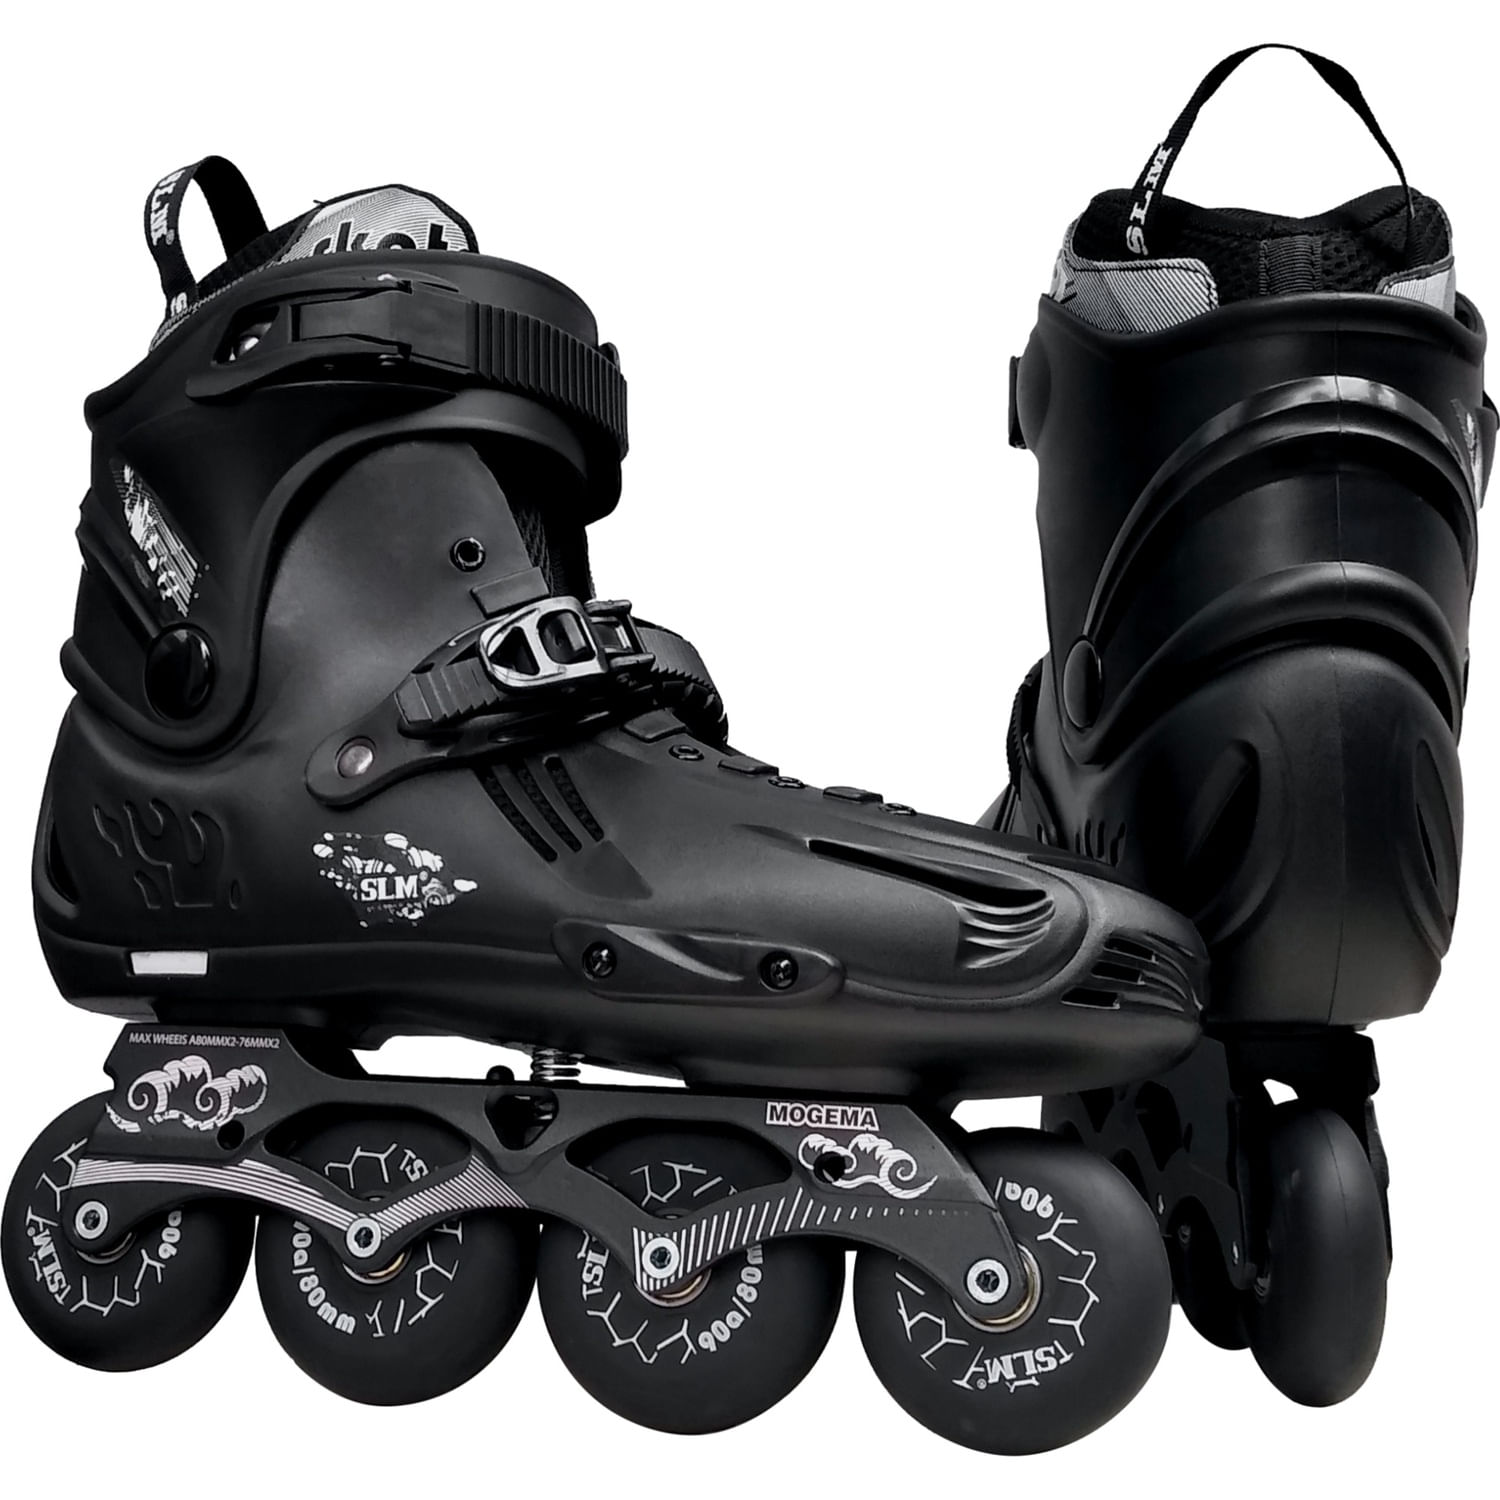 Patines Lineales T/38 SLM Freestyle Profesionales